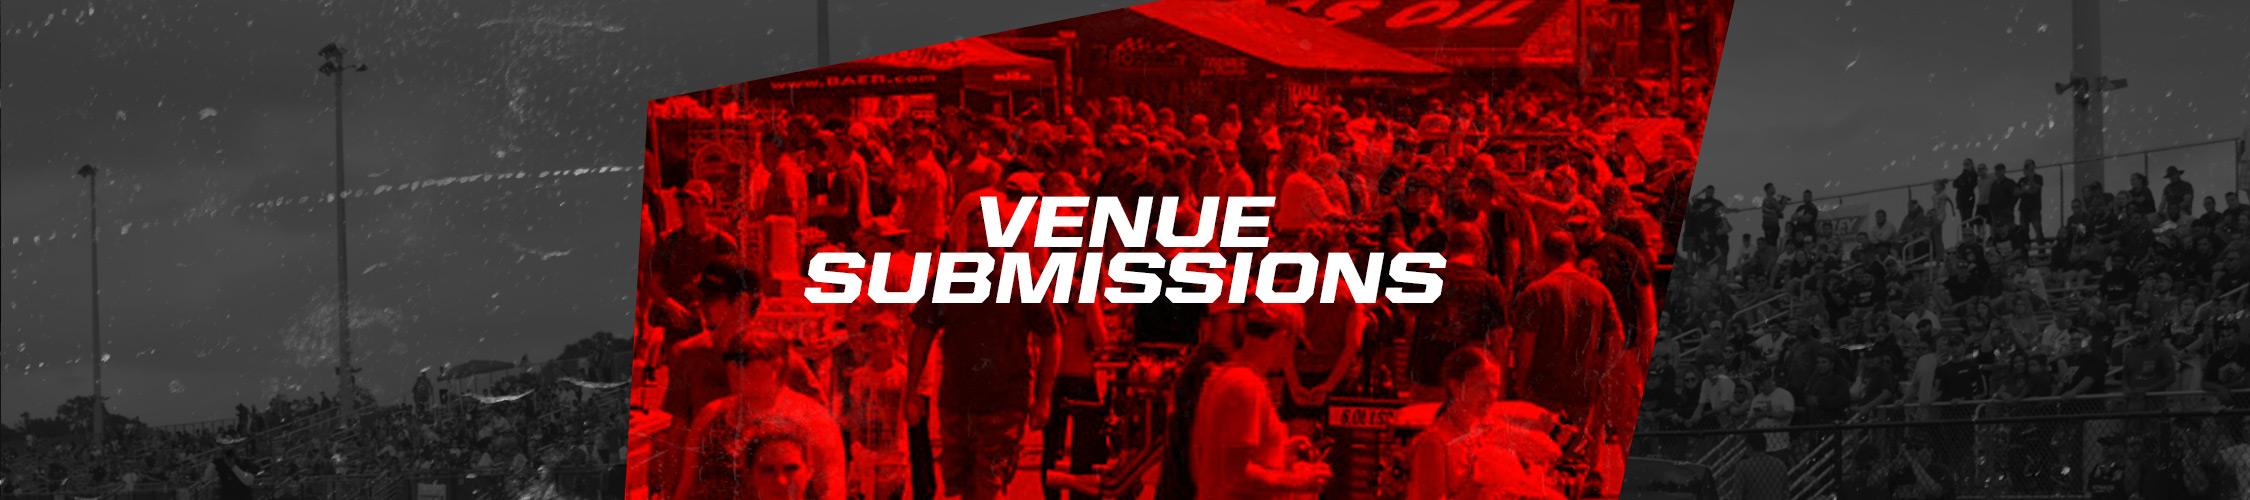 Venue Event/Submissions